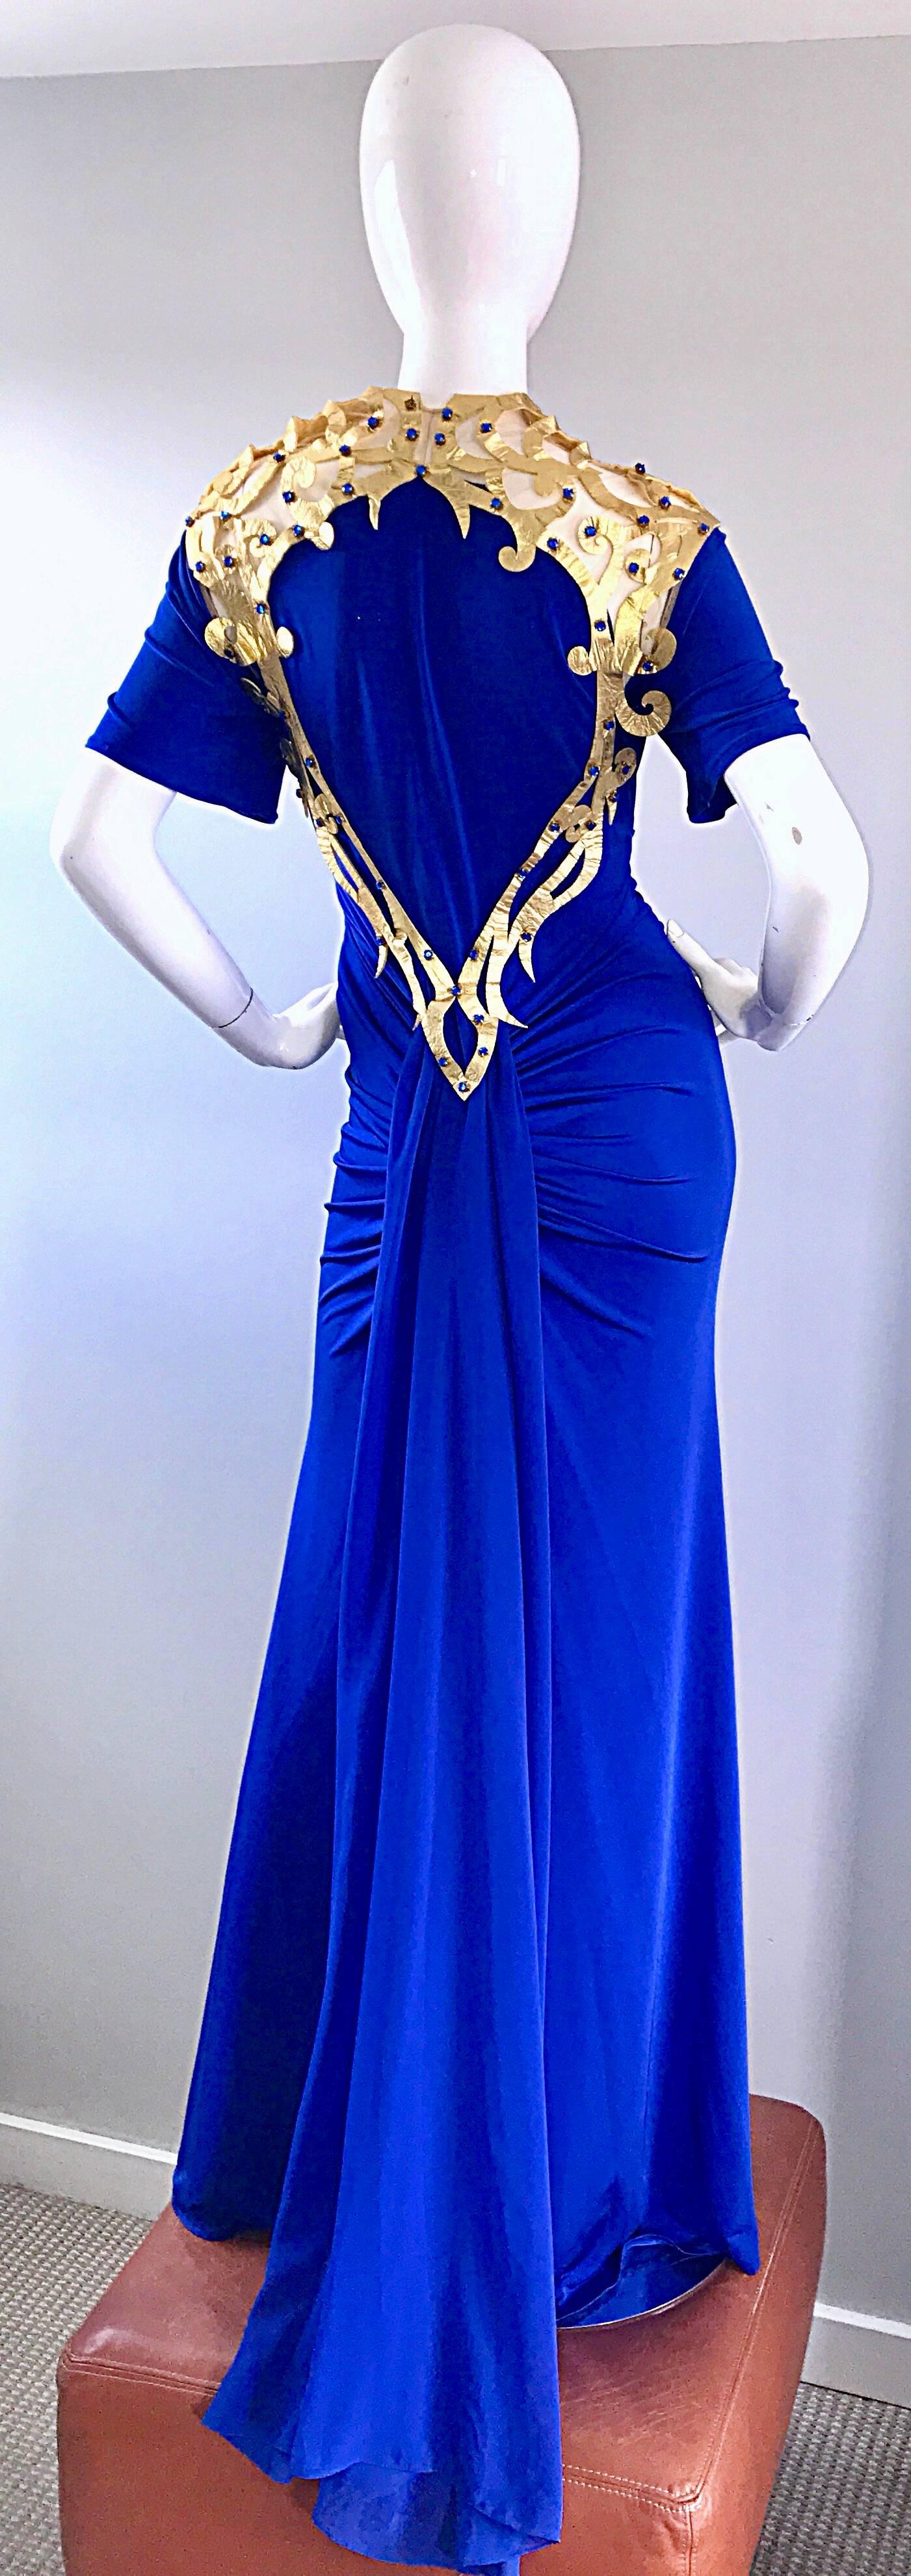 Amazing vintage royal blue jersey and gold leather caged gladiator style designer couture evening dress! Features slinky royal blue ruched jersey that stretches to fit. Gold leather cut-out collar that leads down the back. Blue rhinestones hand-sewn